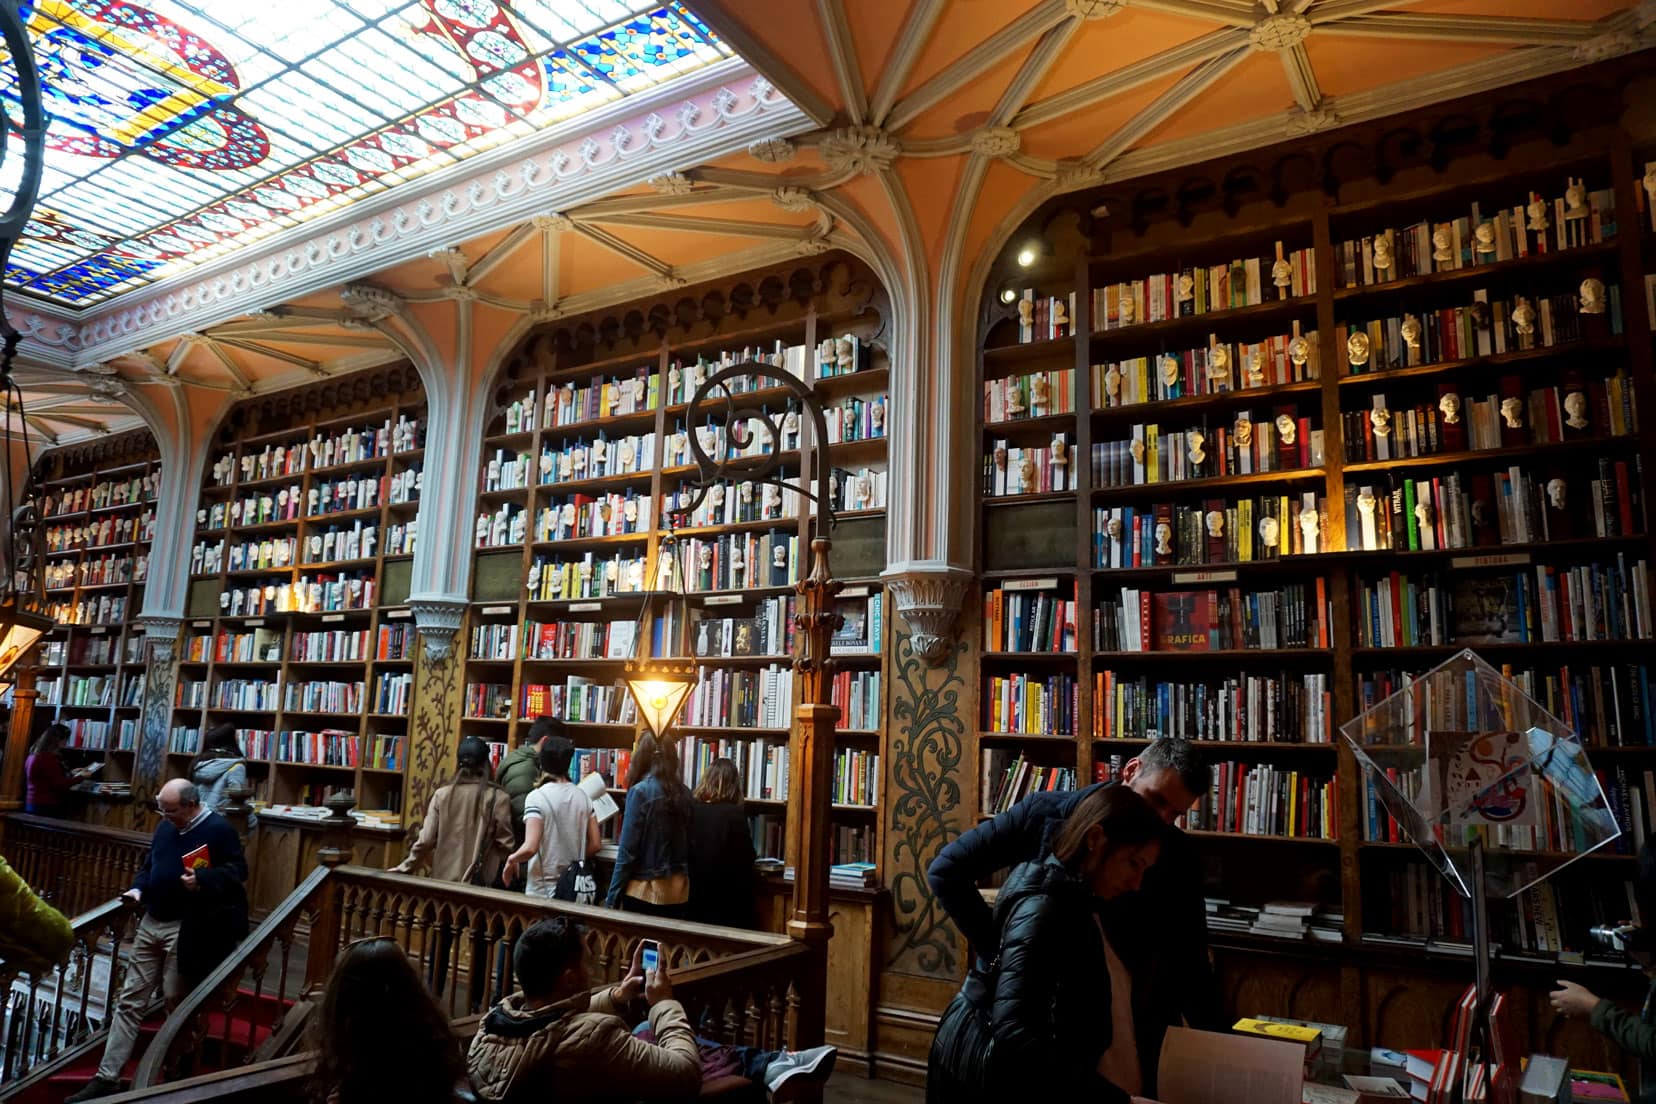 floor to ceiling book shelves in the Livraria lello bookshop in porto surrounded by decorated and carved altraves